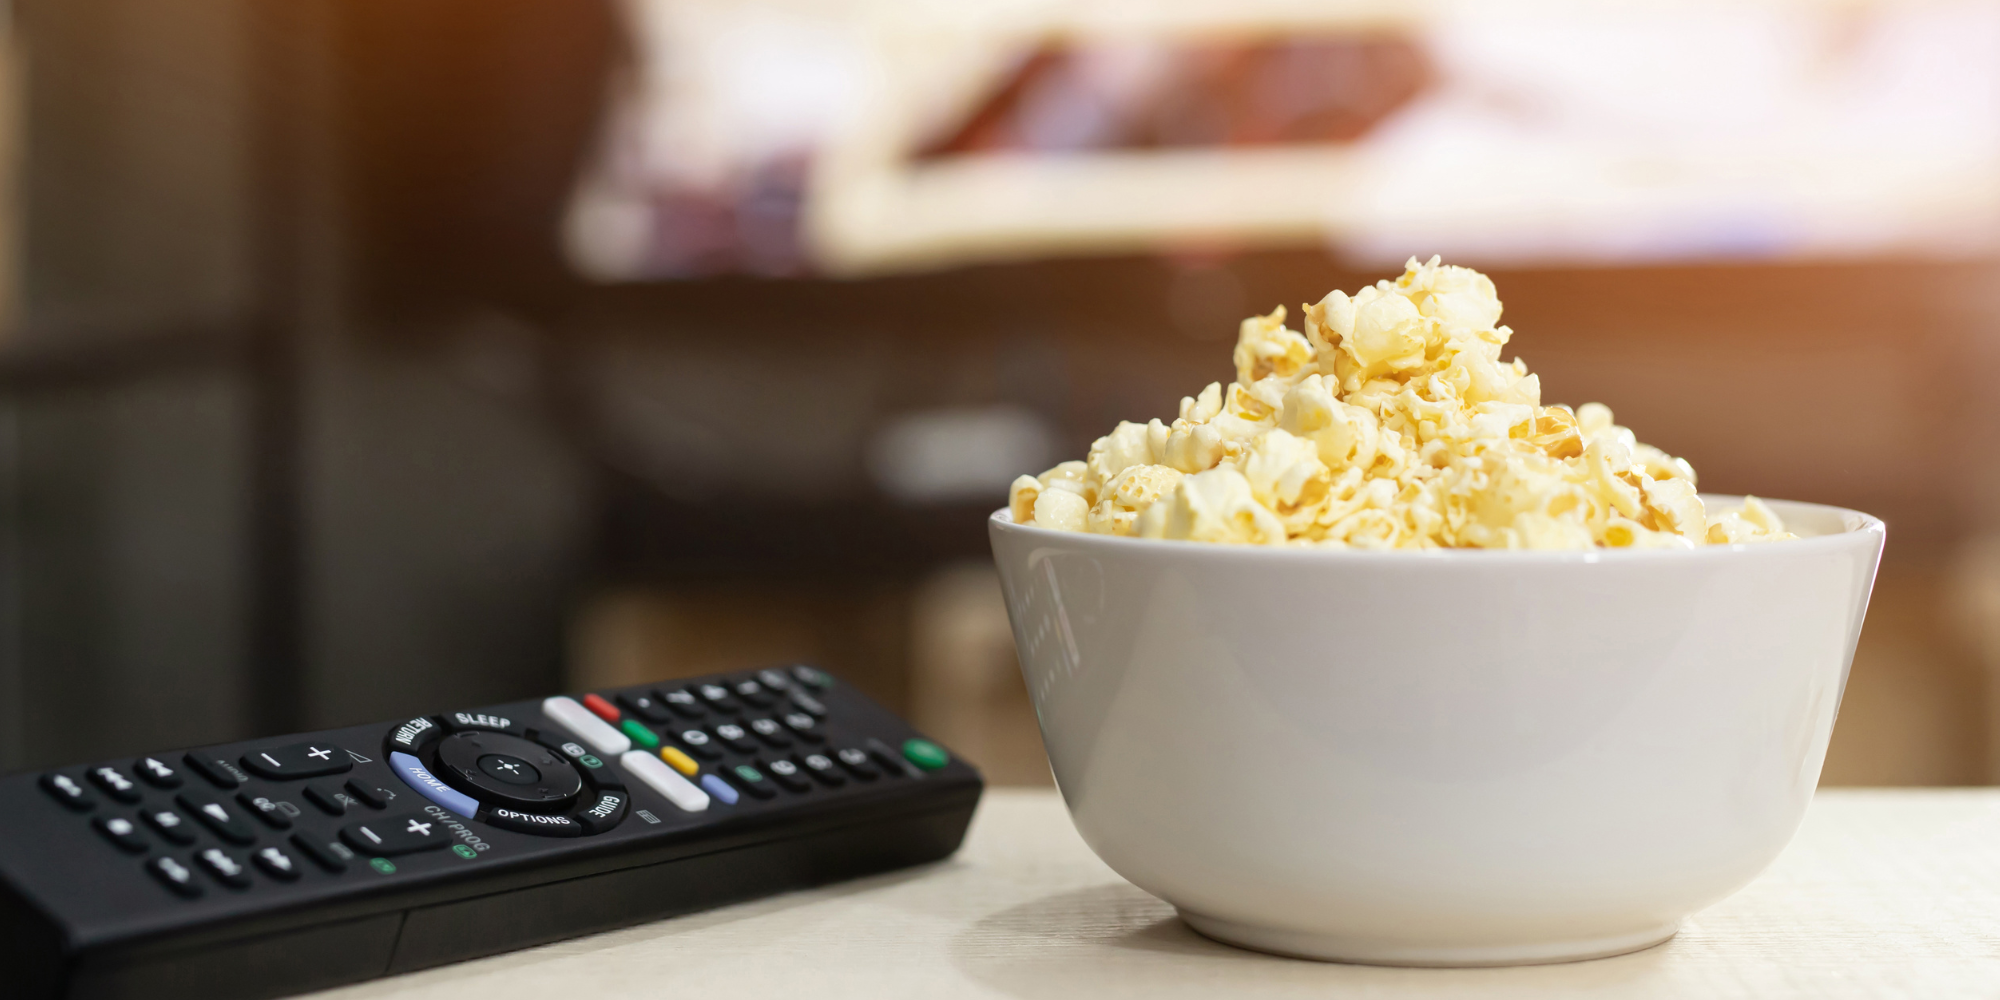 a TV remote next to a bowl of popcorn. Blurred in the distance, you can see a turned-on TV screen.